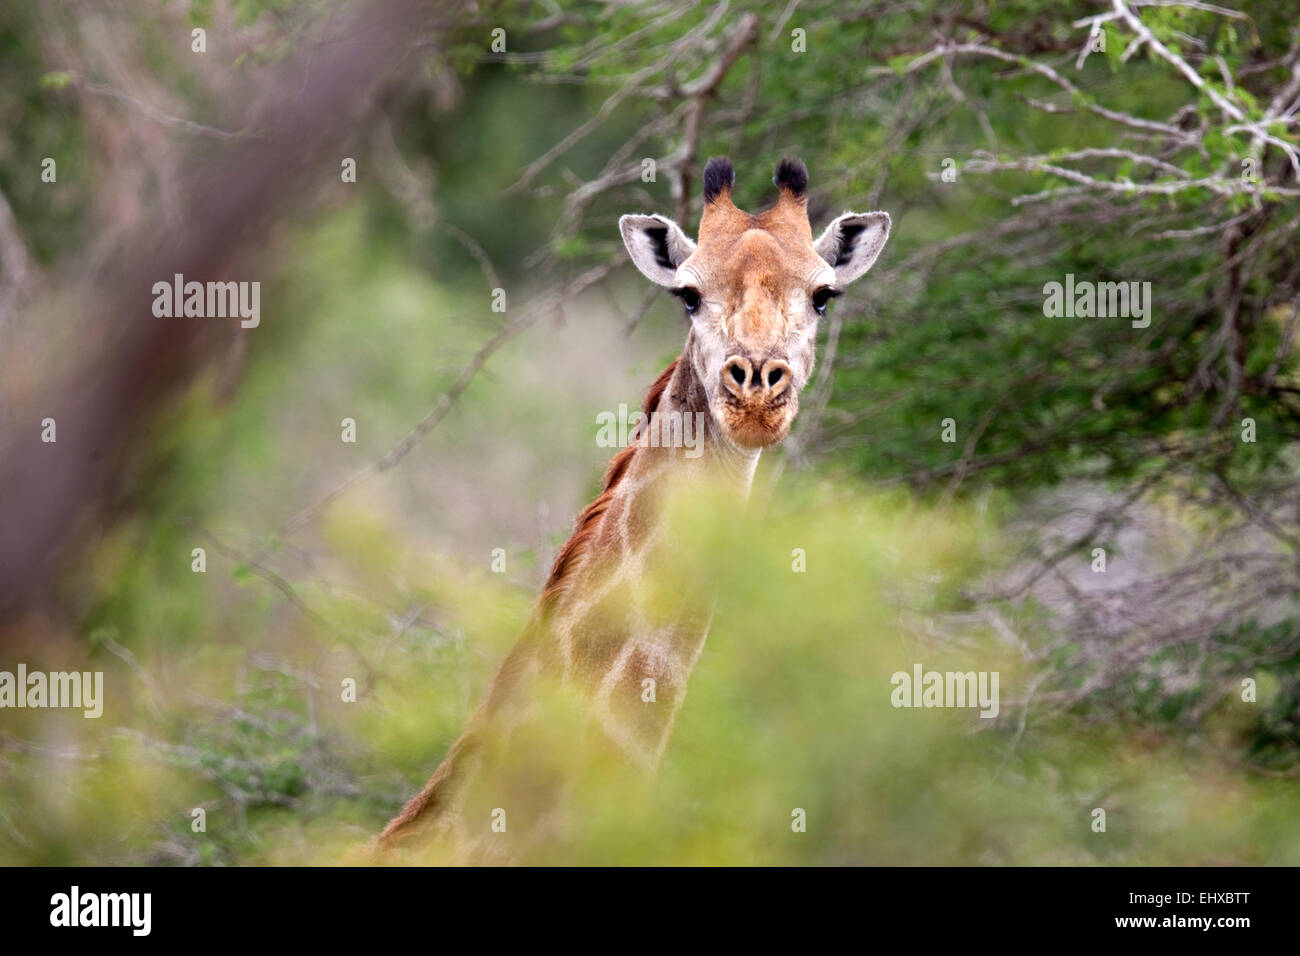 A young giraffe (Giraffa camelopardalis) peers from behind a tree. Kruger National Park, South Africa Stock Photo